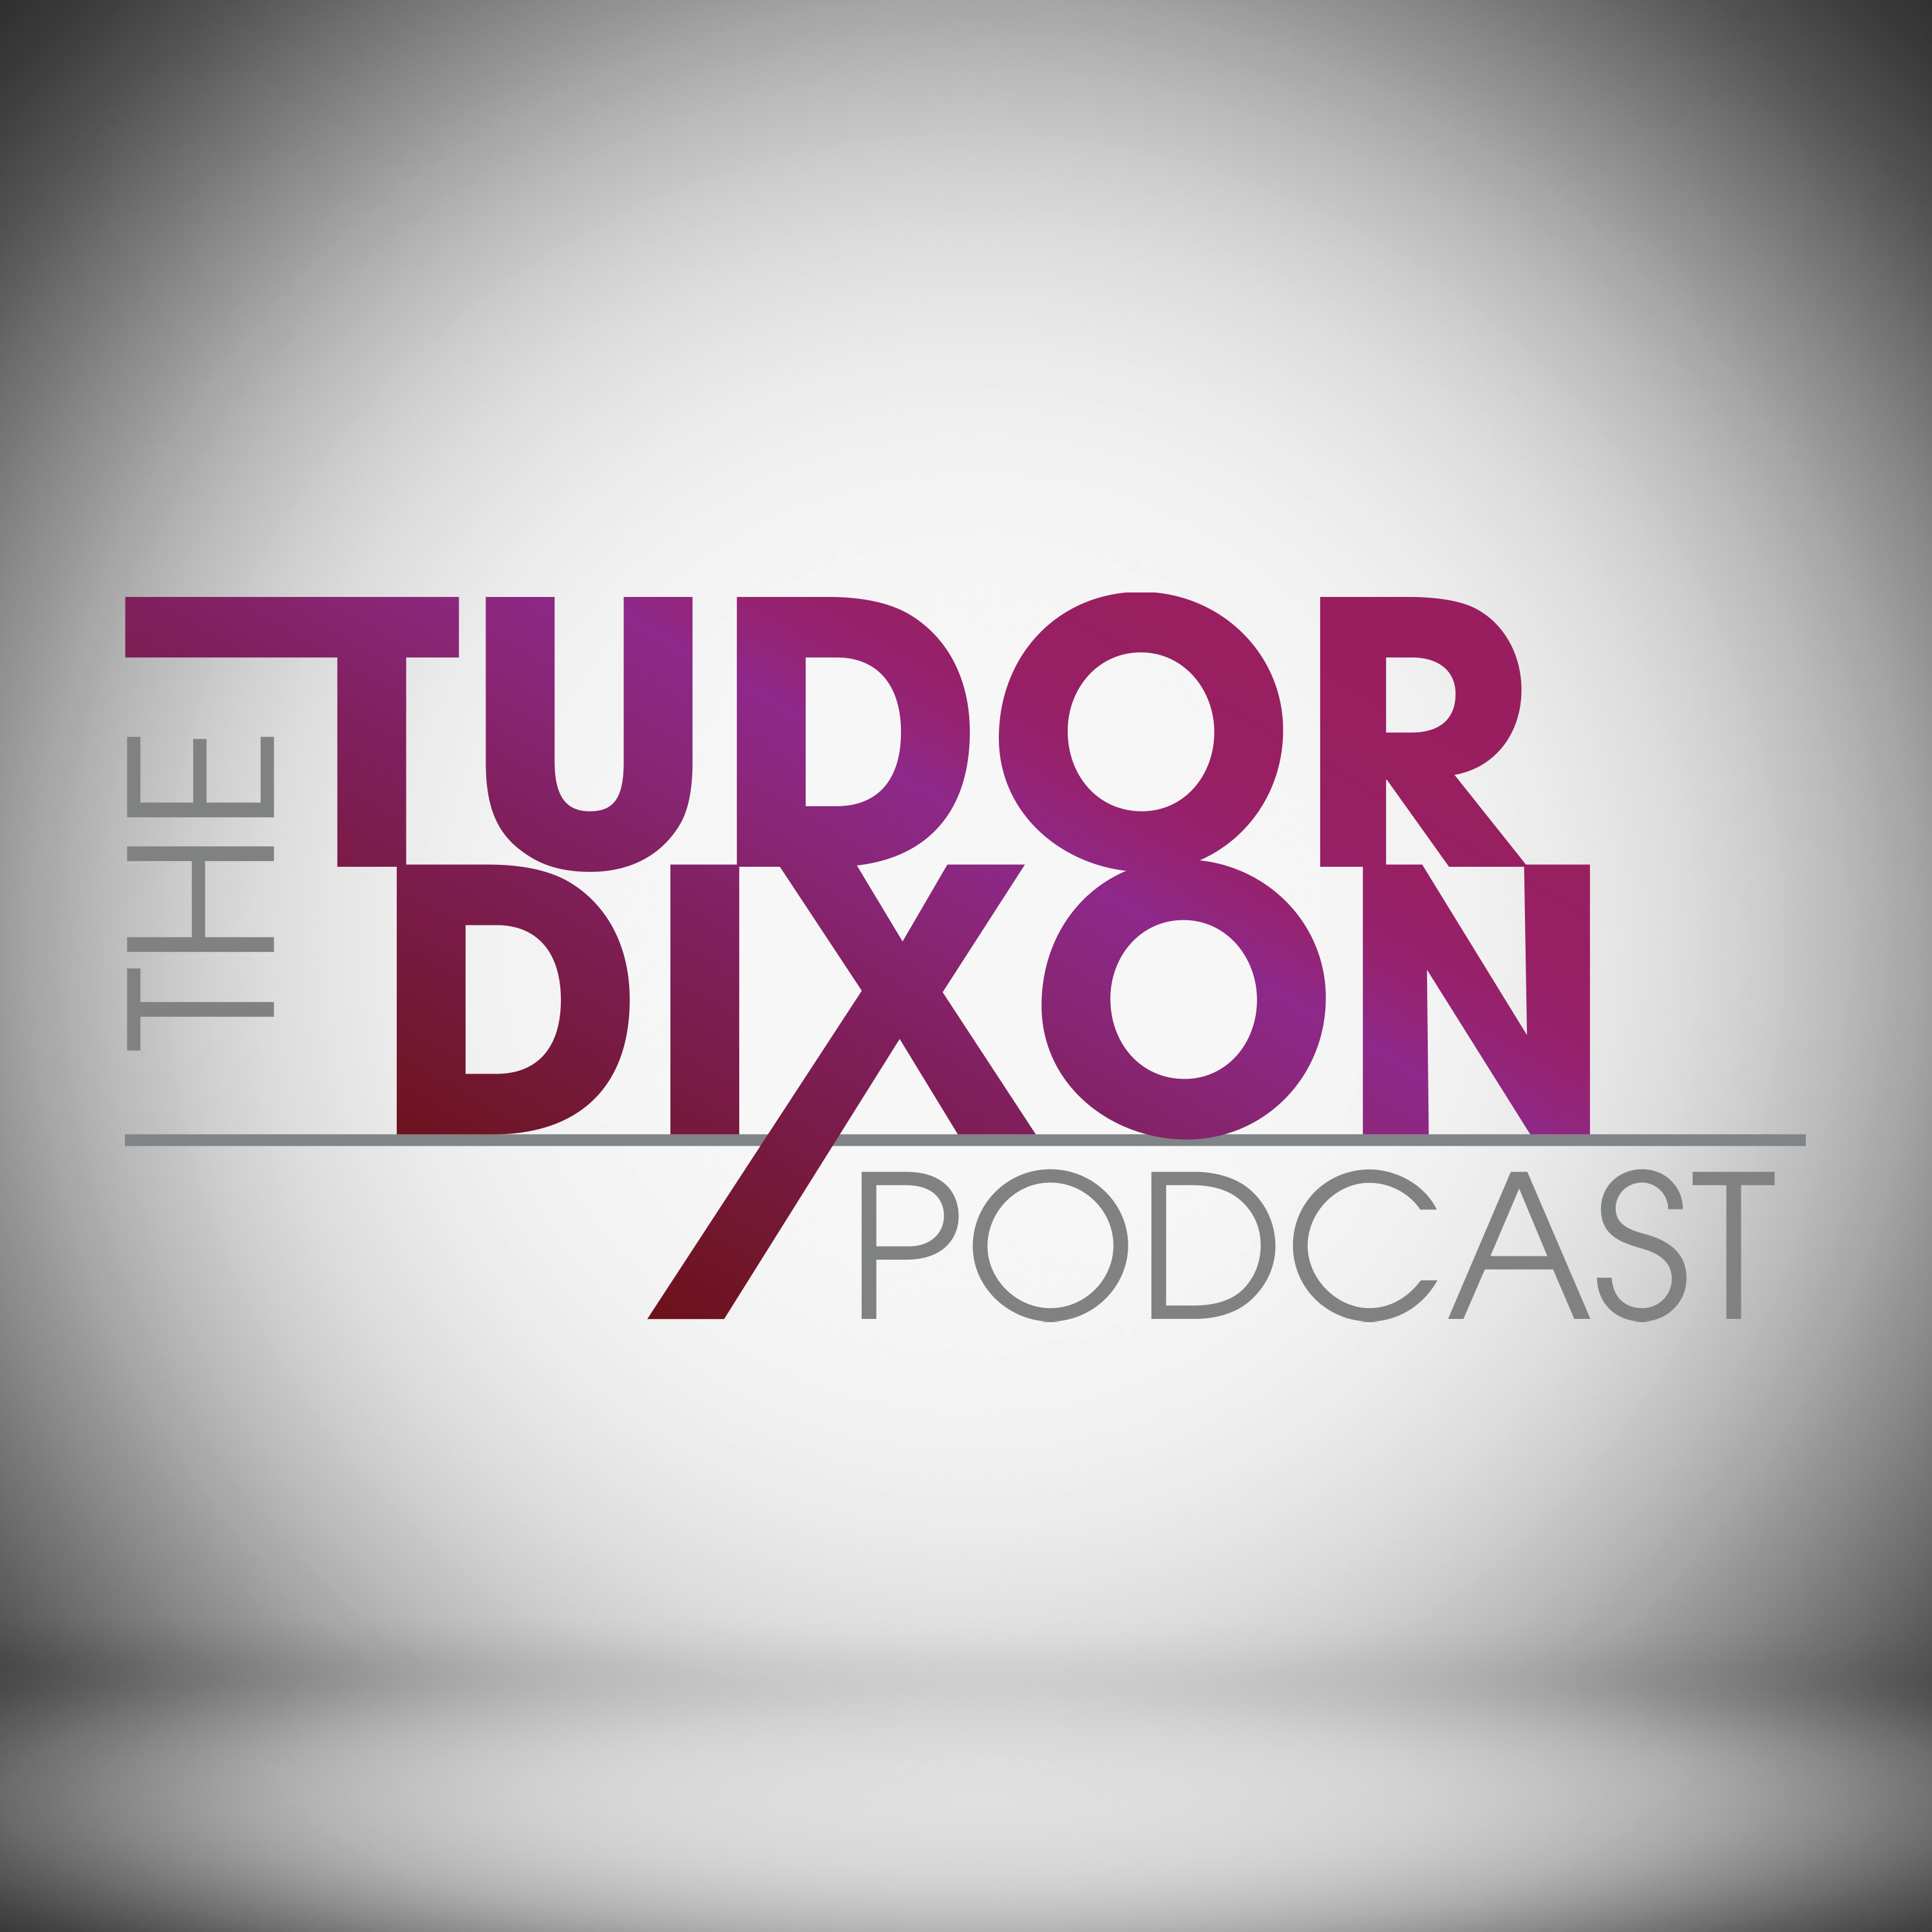 The Tudor Dixon Podcast: Finding Faith and the Impact It Has with Pastor Greg Laurie